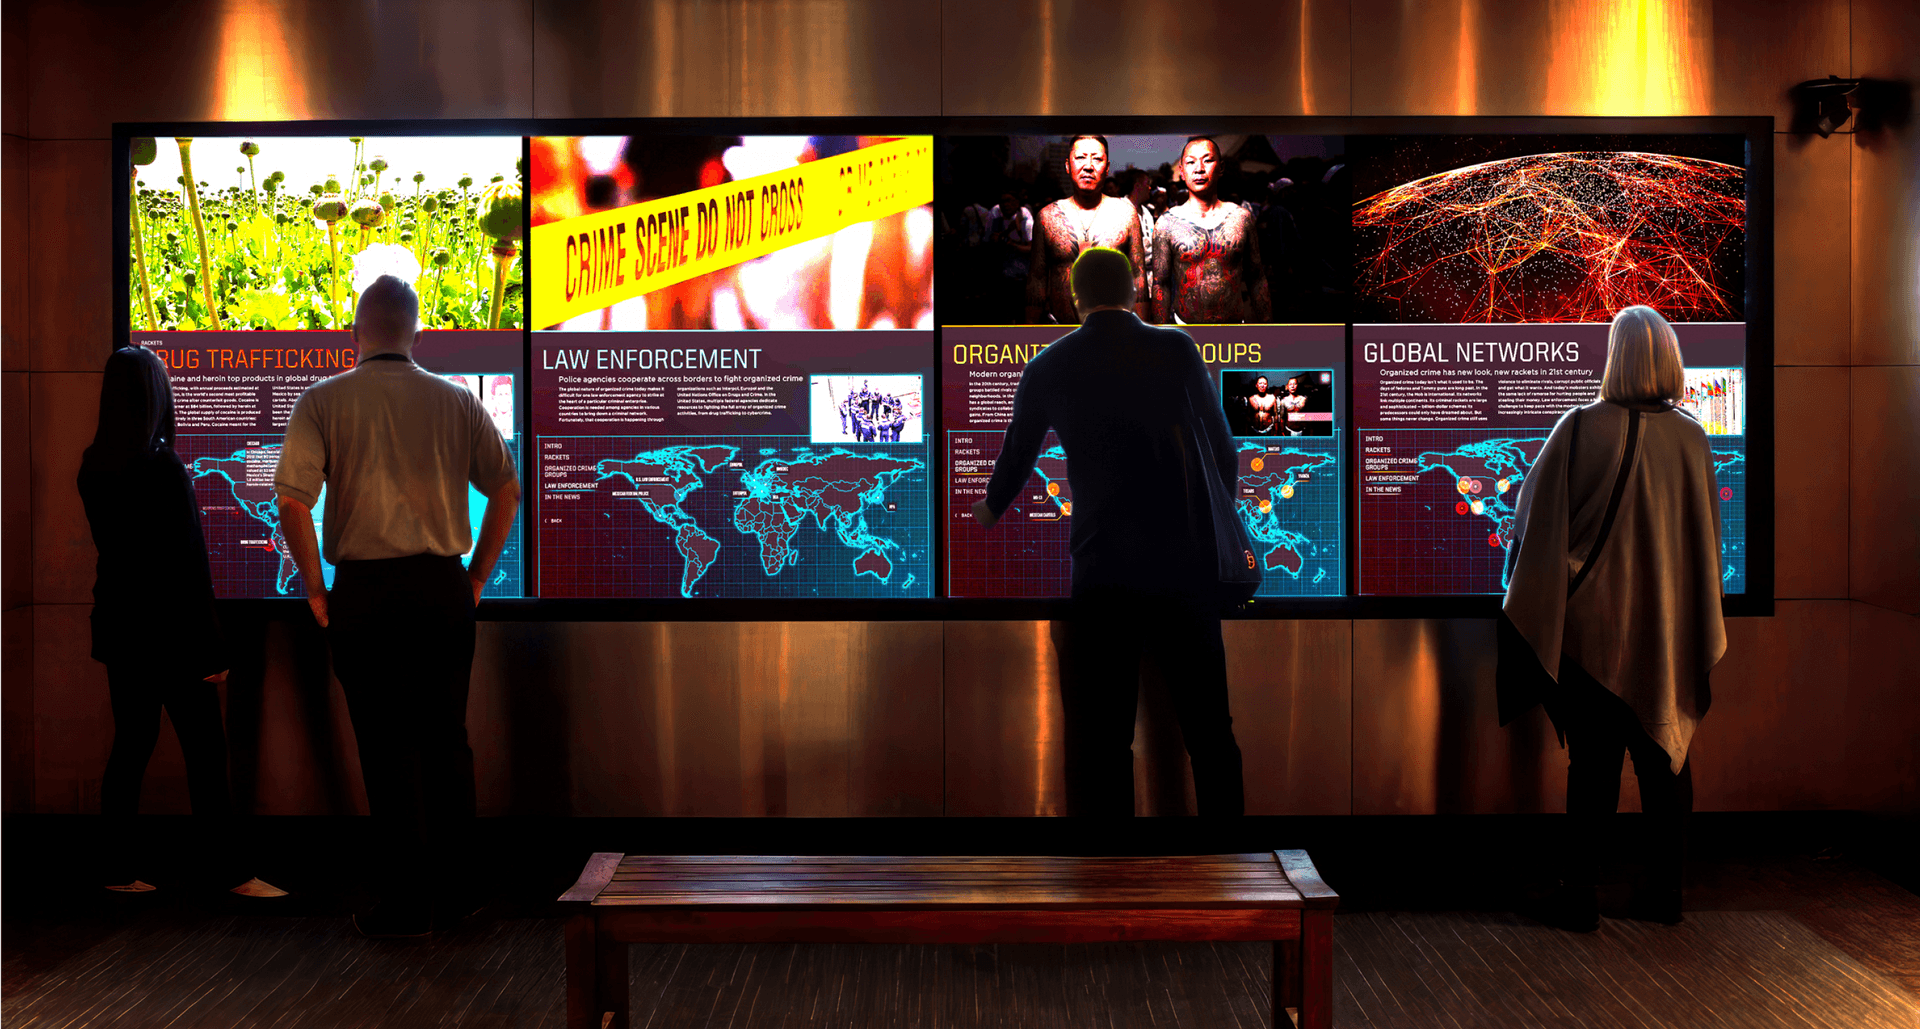 Four museum visitors stand in front of a large video screen exhibit. The screens display text and maps related to topics in global organized crime, including Drug Trafficking, Law Enforcement and Global Networks. Two of the visitors are touching the screens to make selections.